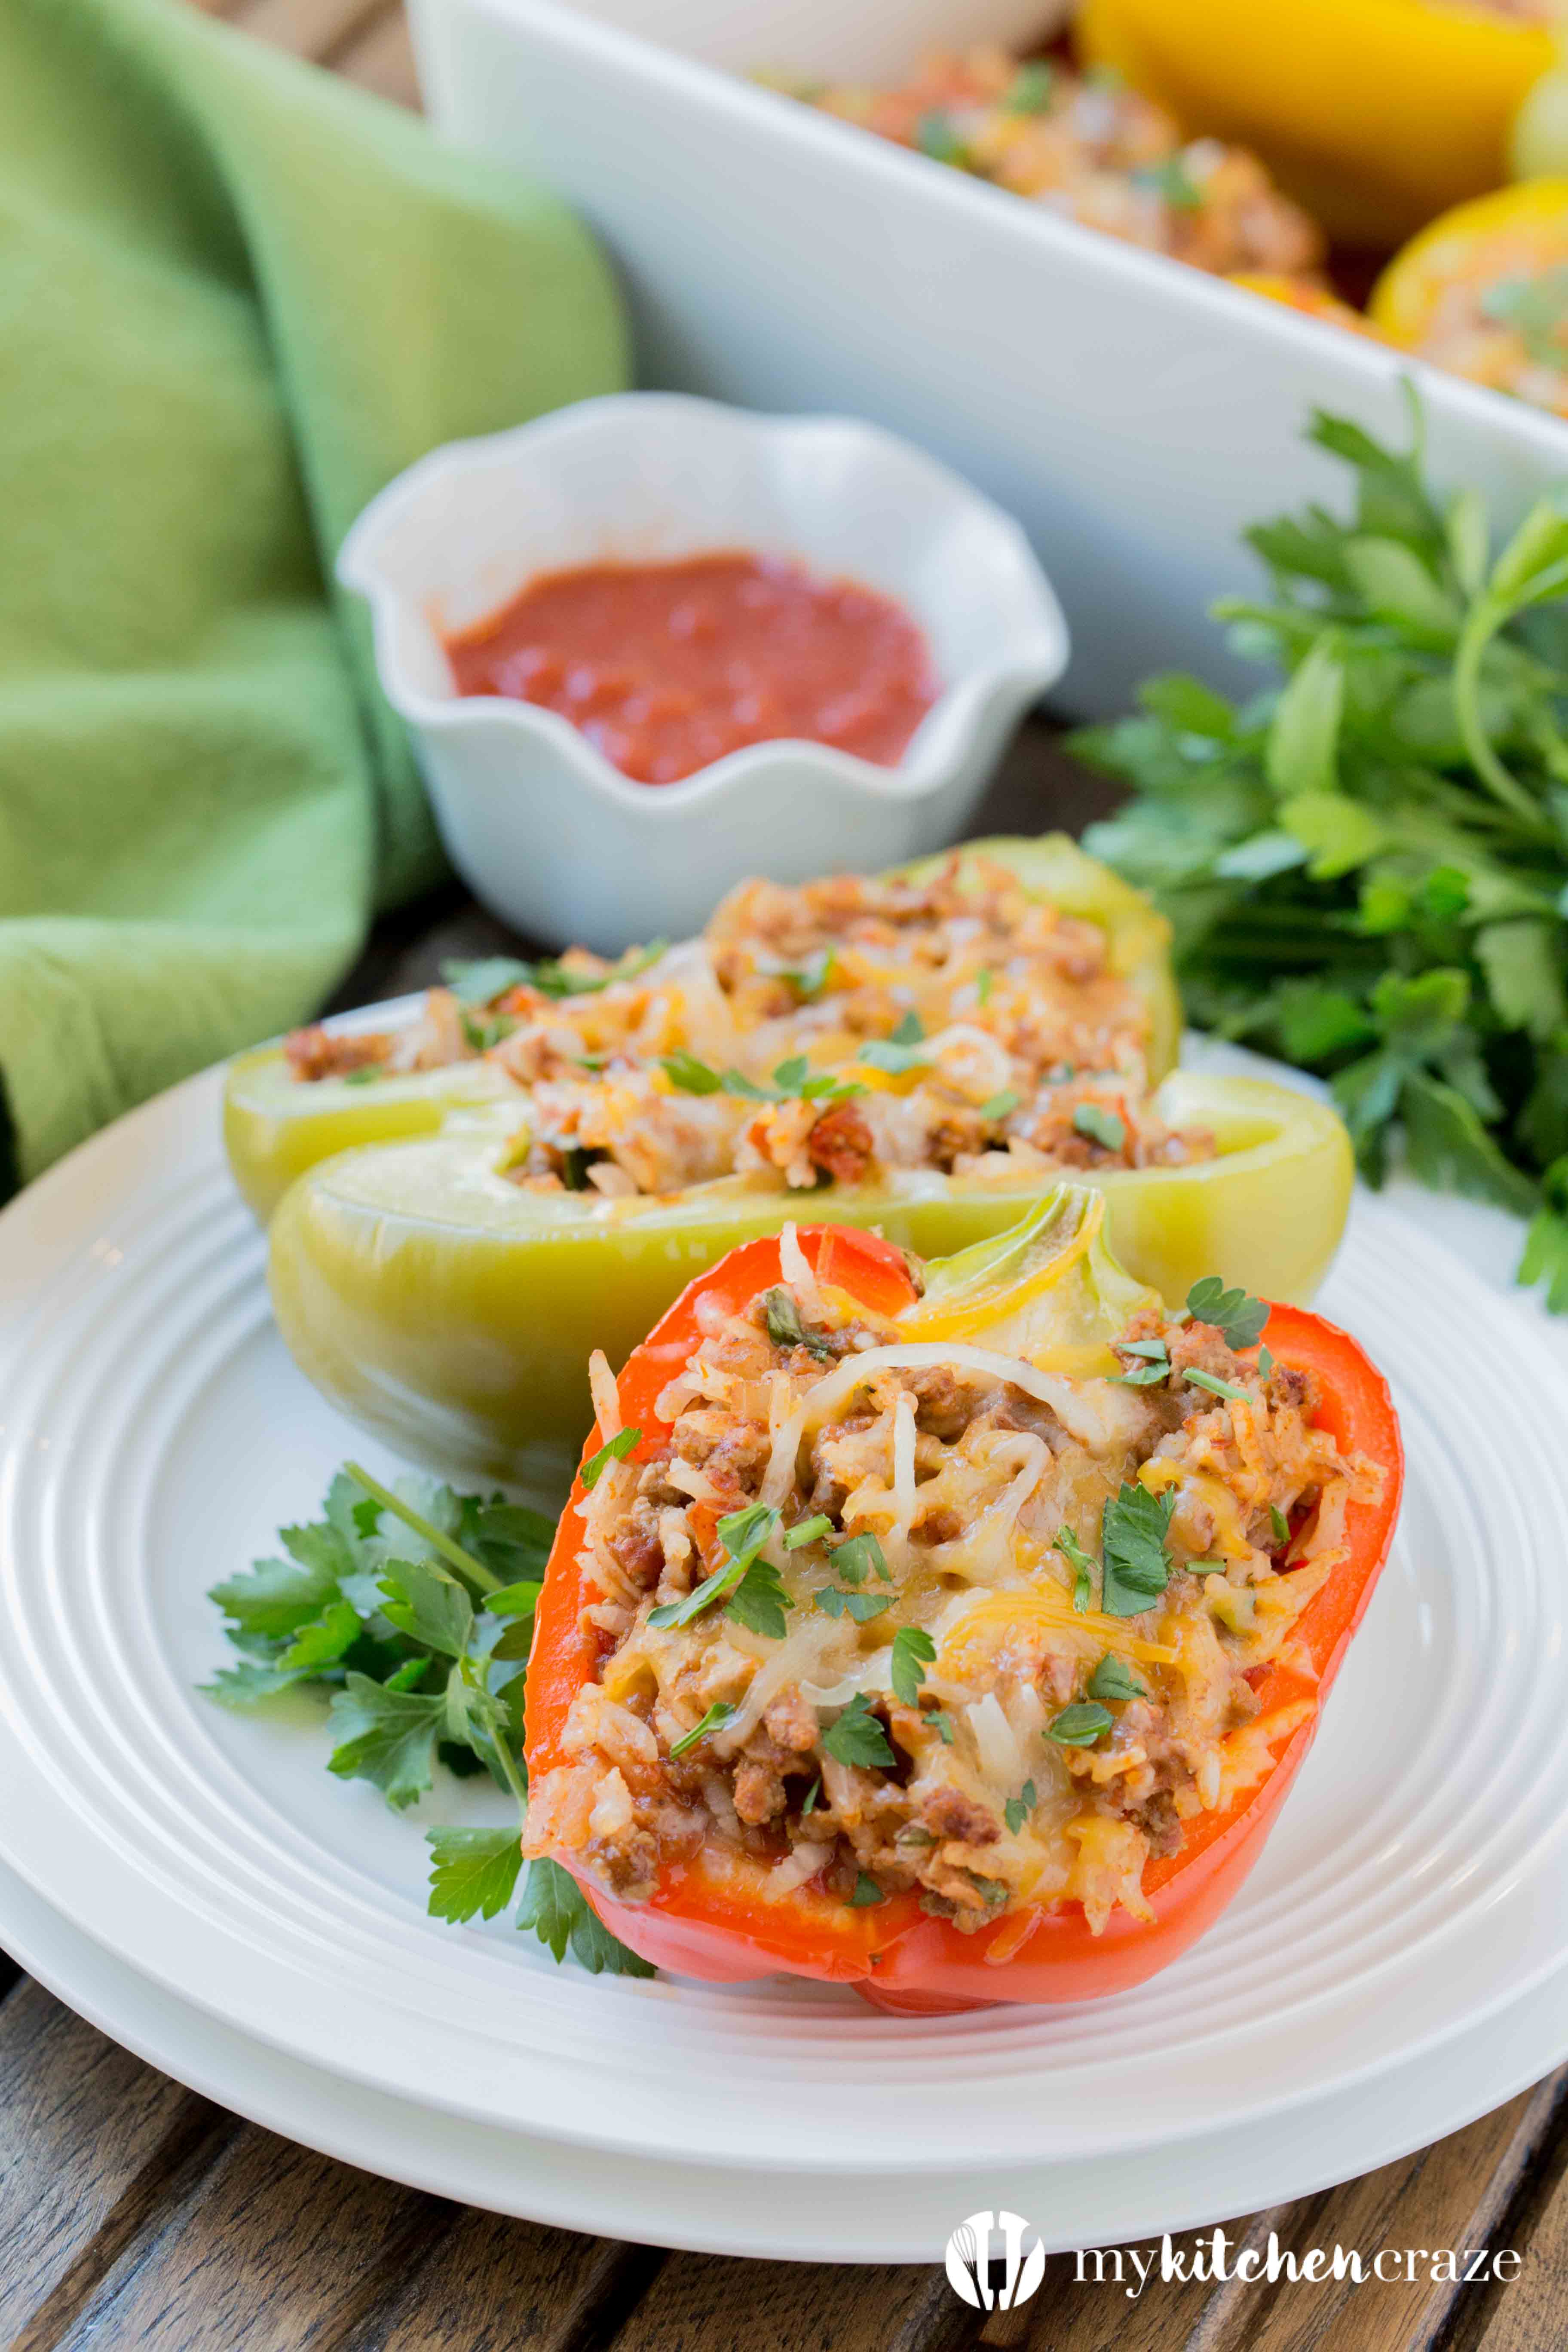 Stuffed Bell Peppers are a healthy and delicious dinner meal. Packed with delicious flavor, even the picky eaters will love them!